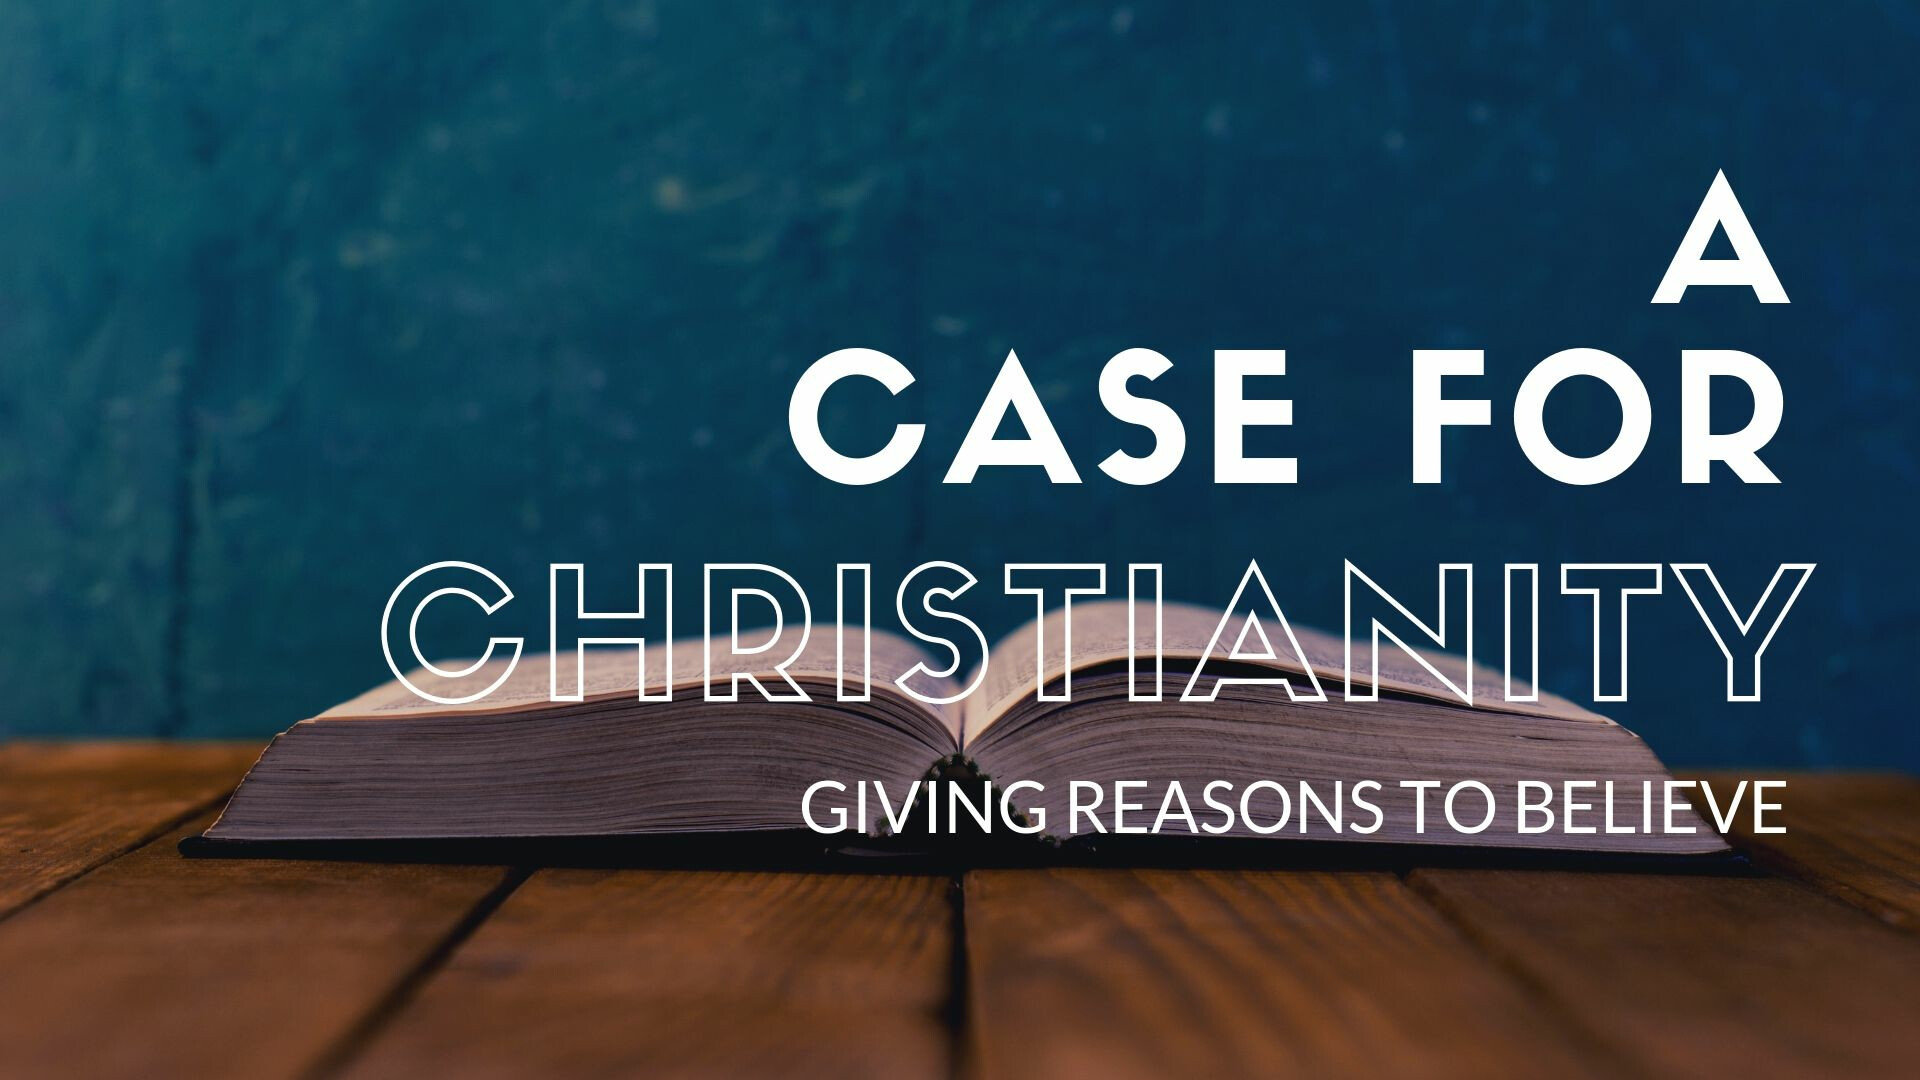 A Case for Christianity: Giving Reasons to Believe